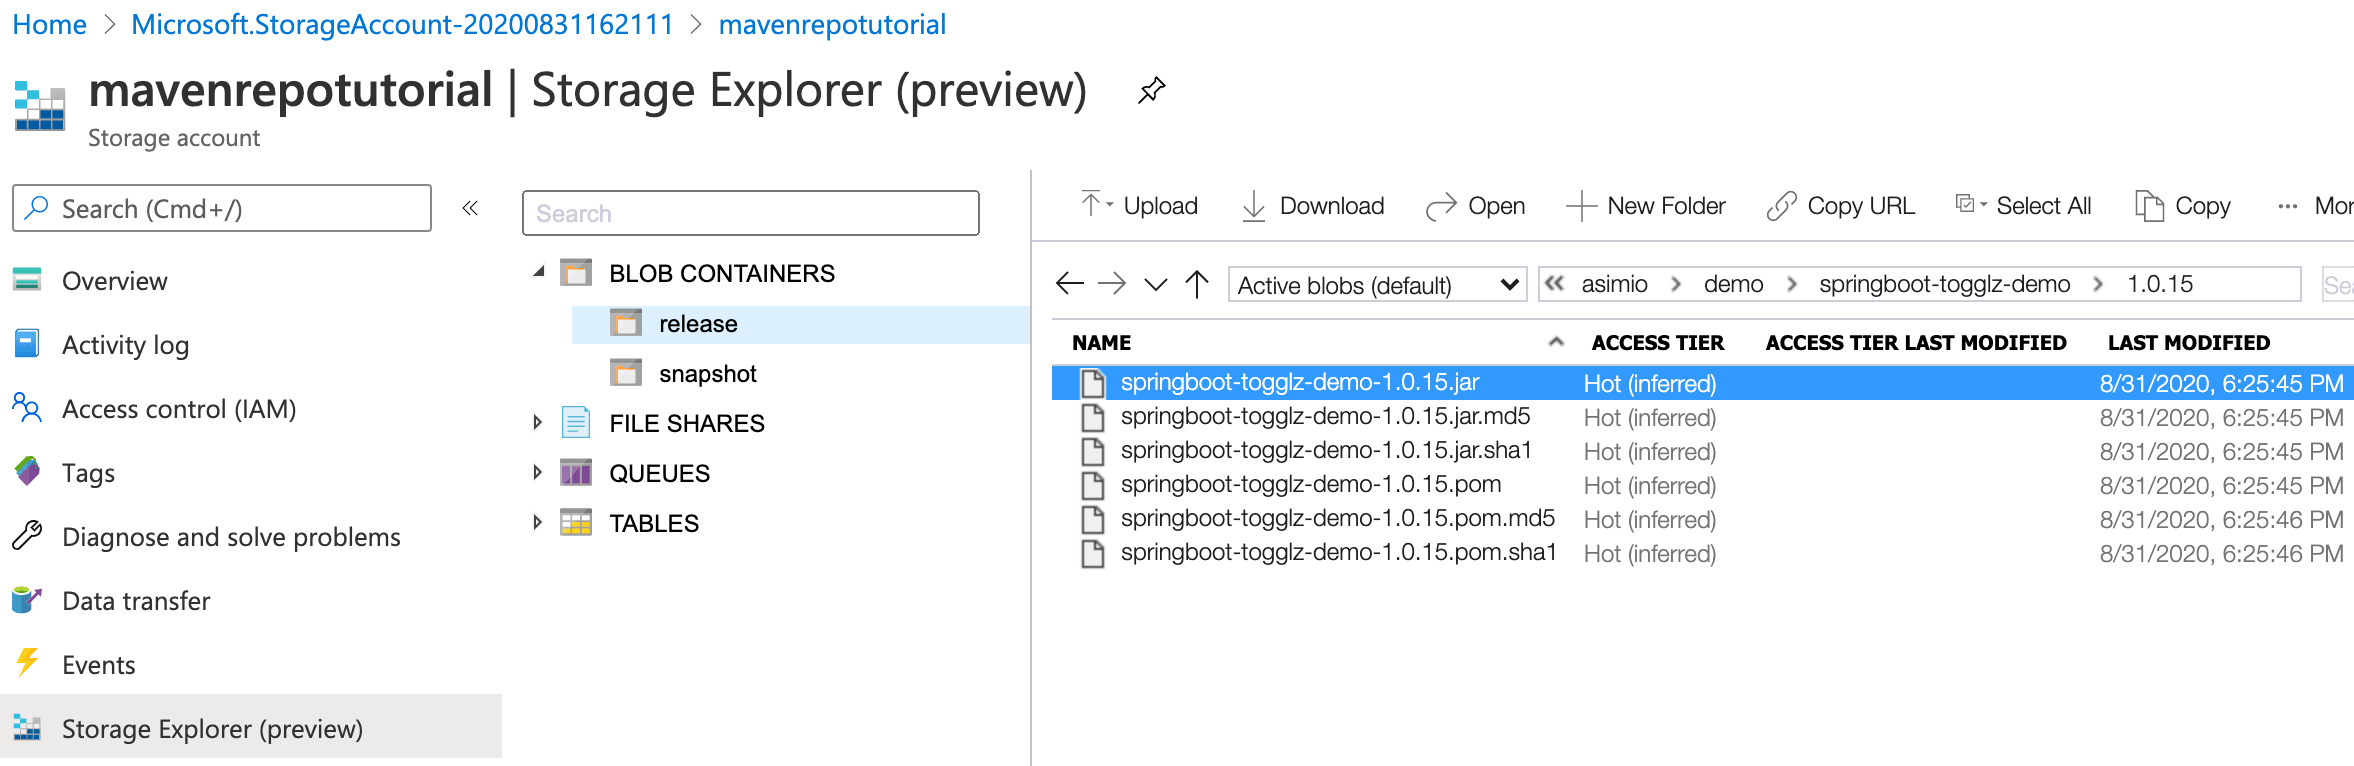 Deploying a Maven release artifact to an Azure Storage Container